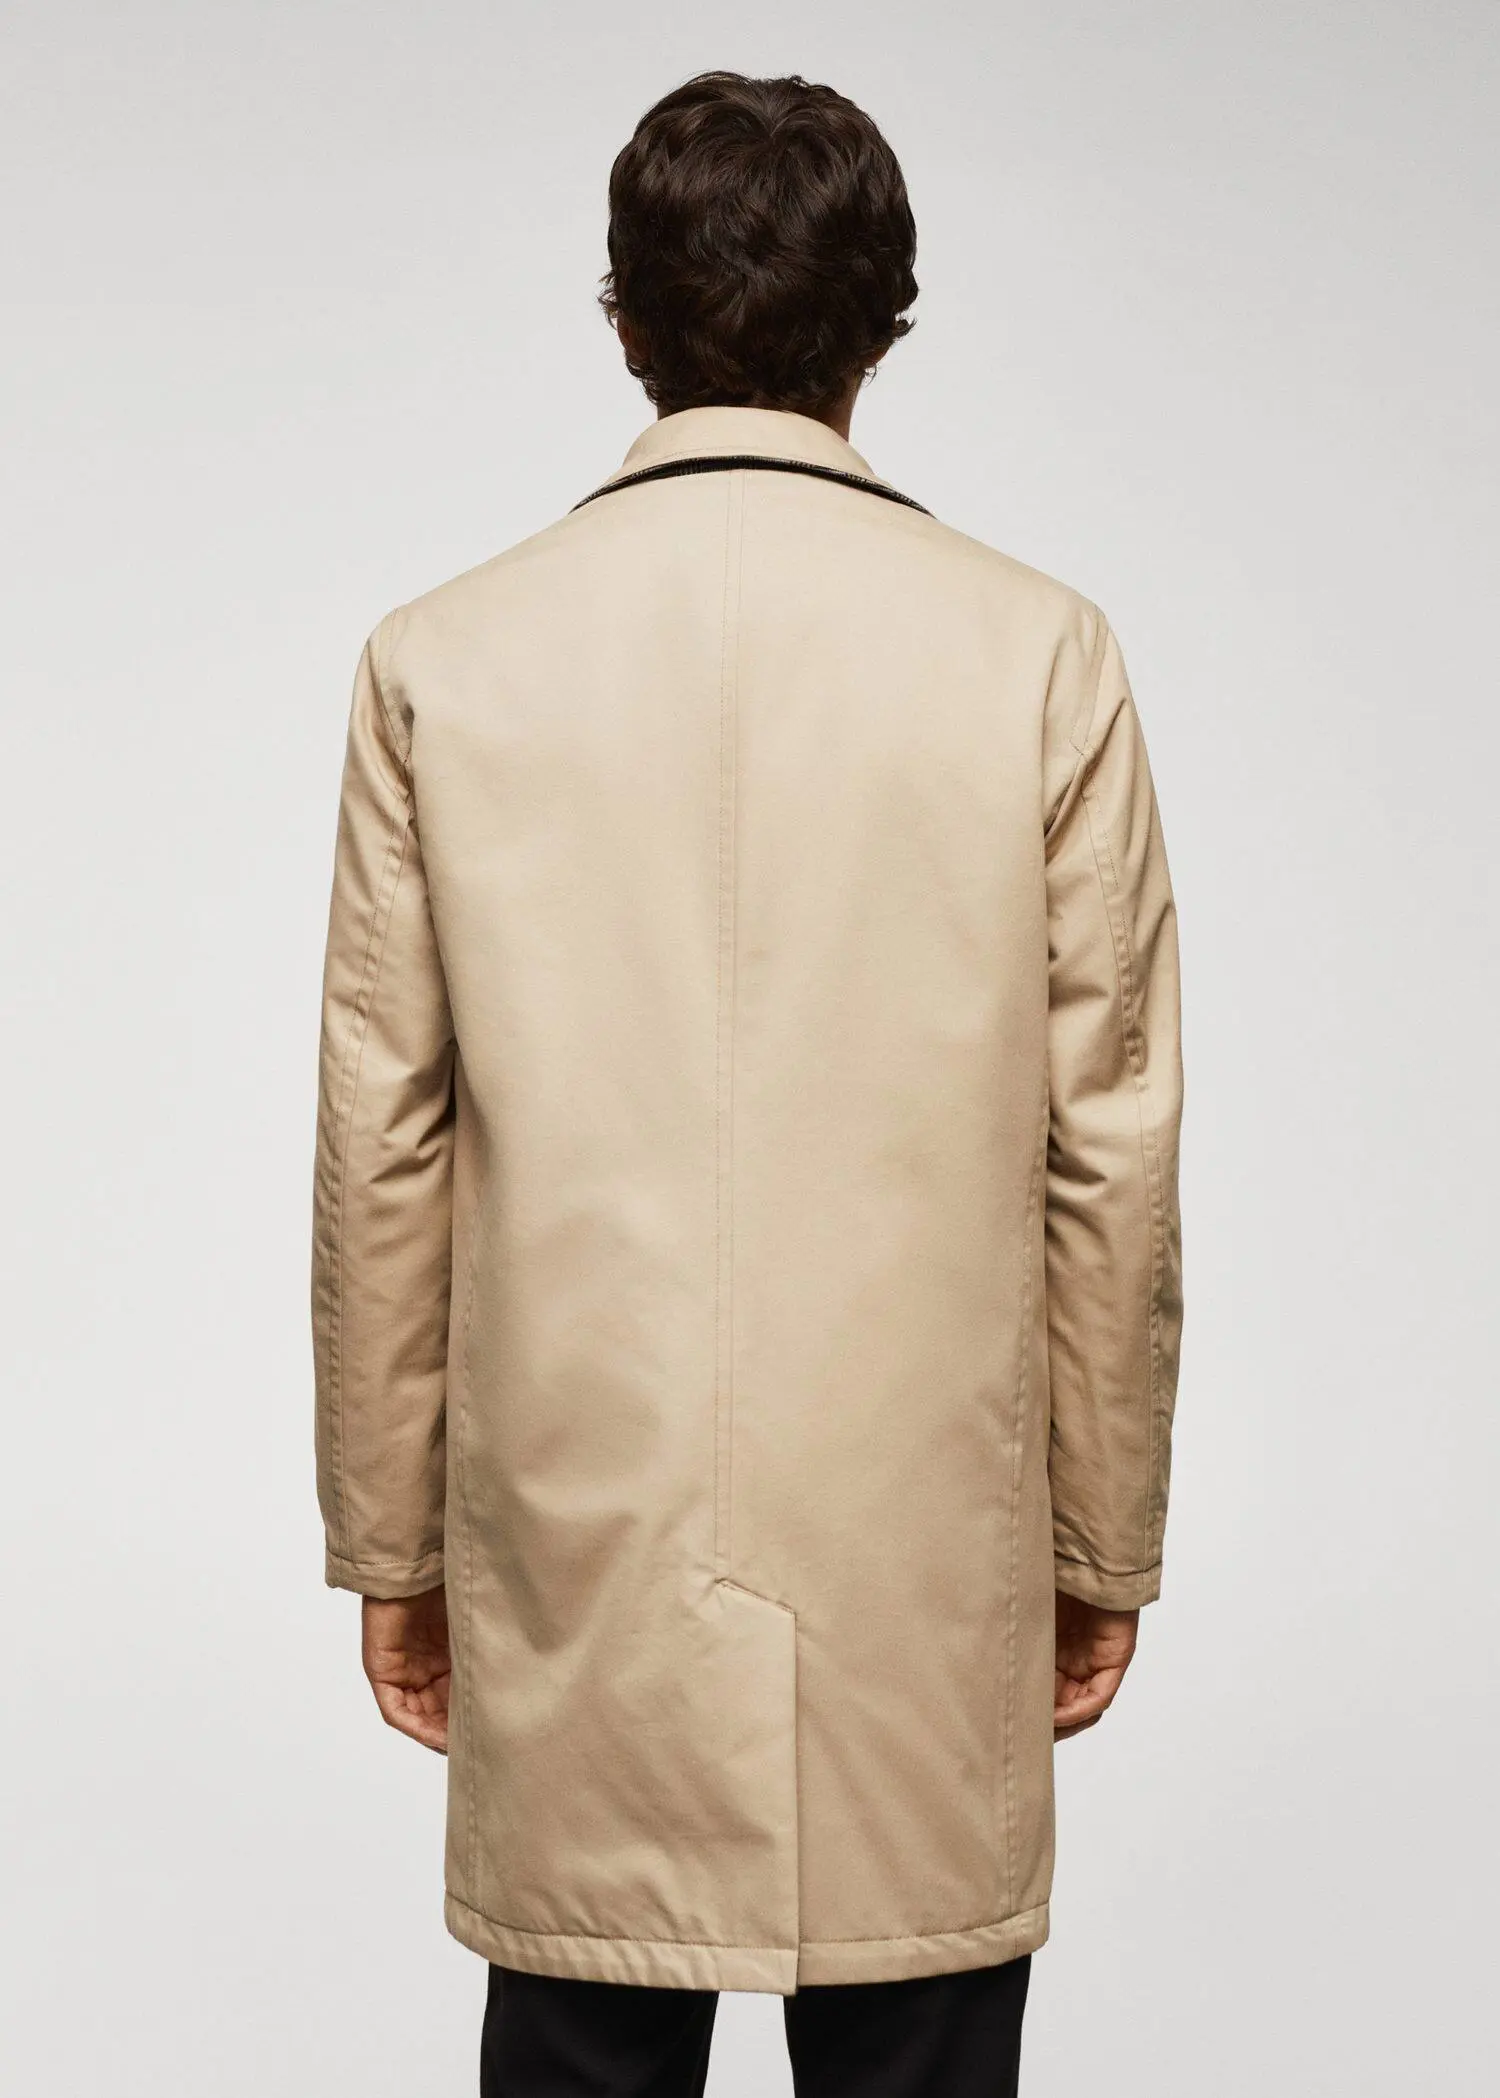 Mango Reversible recycled wool trench coat. 3